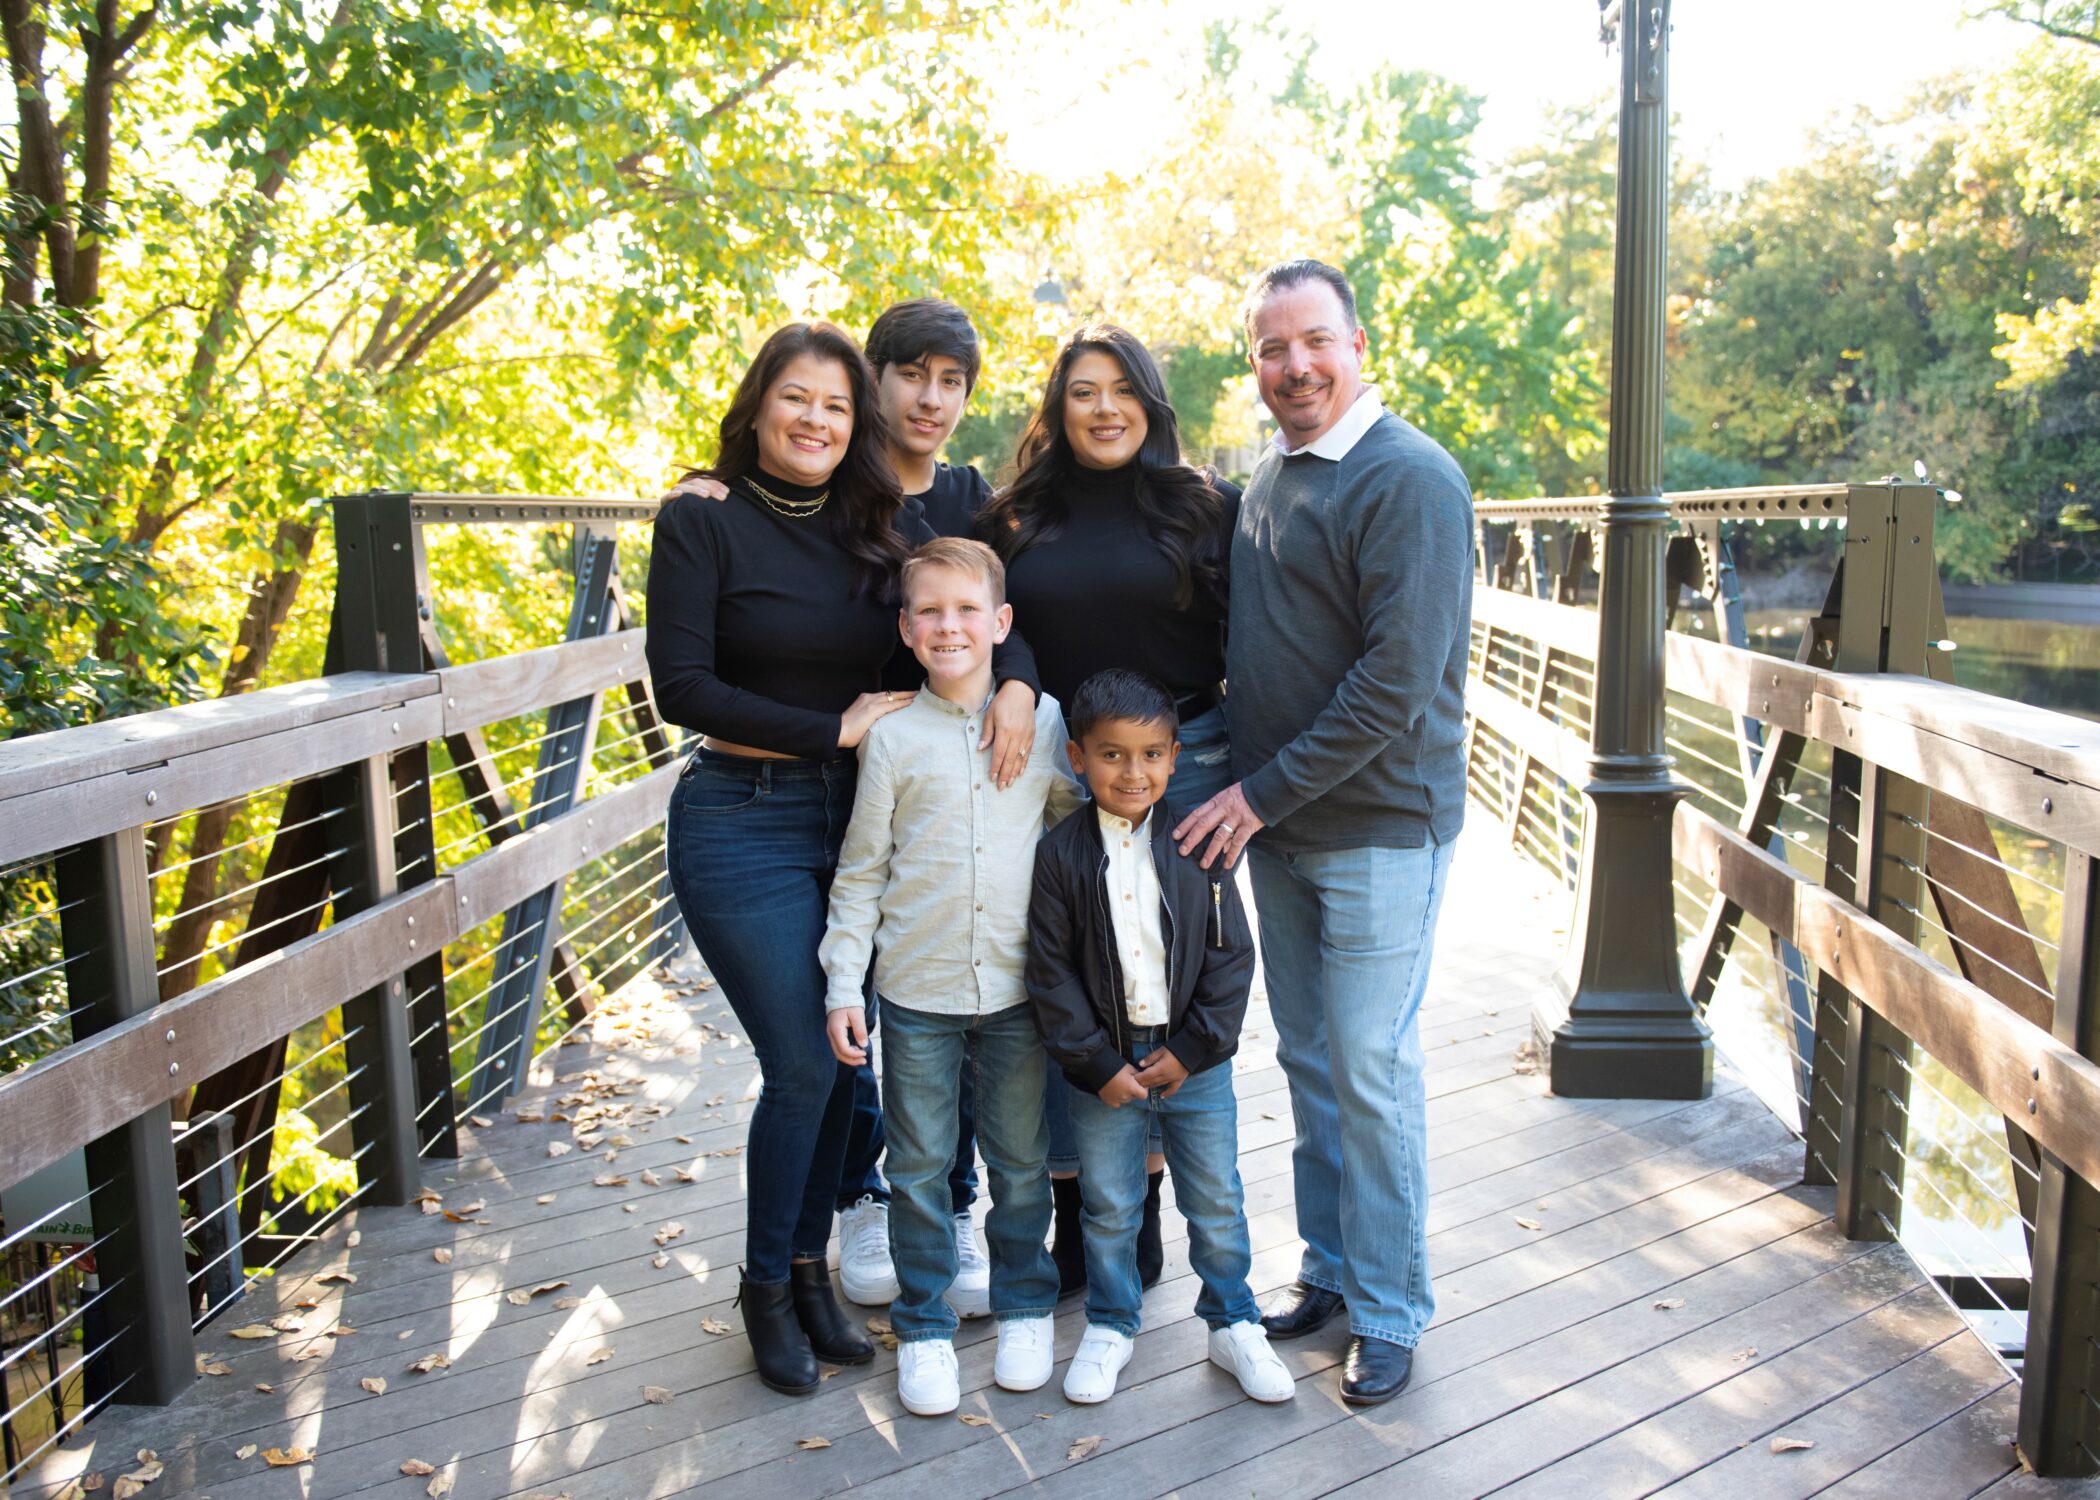 The Sidwell family poses on a bridge for family pictures.